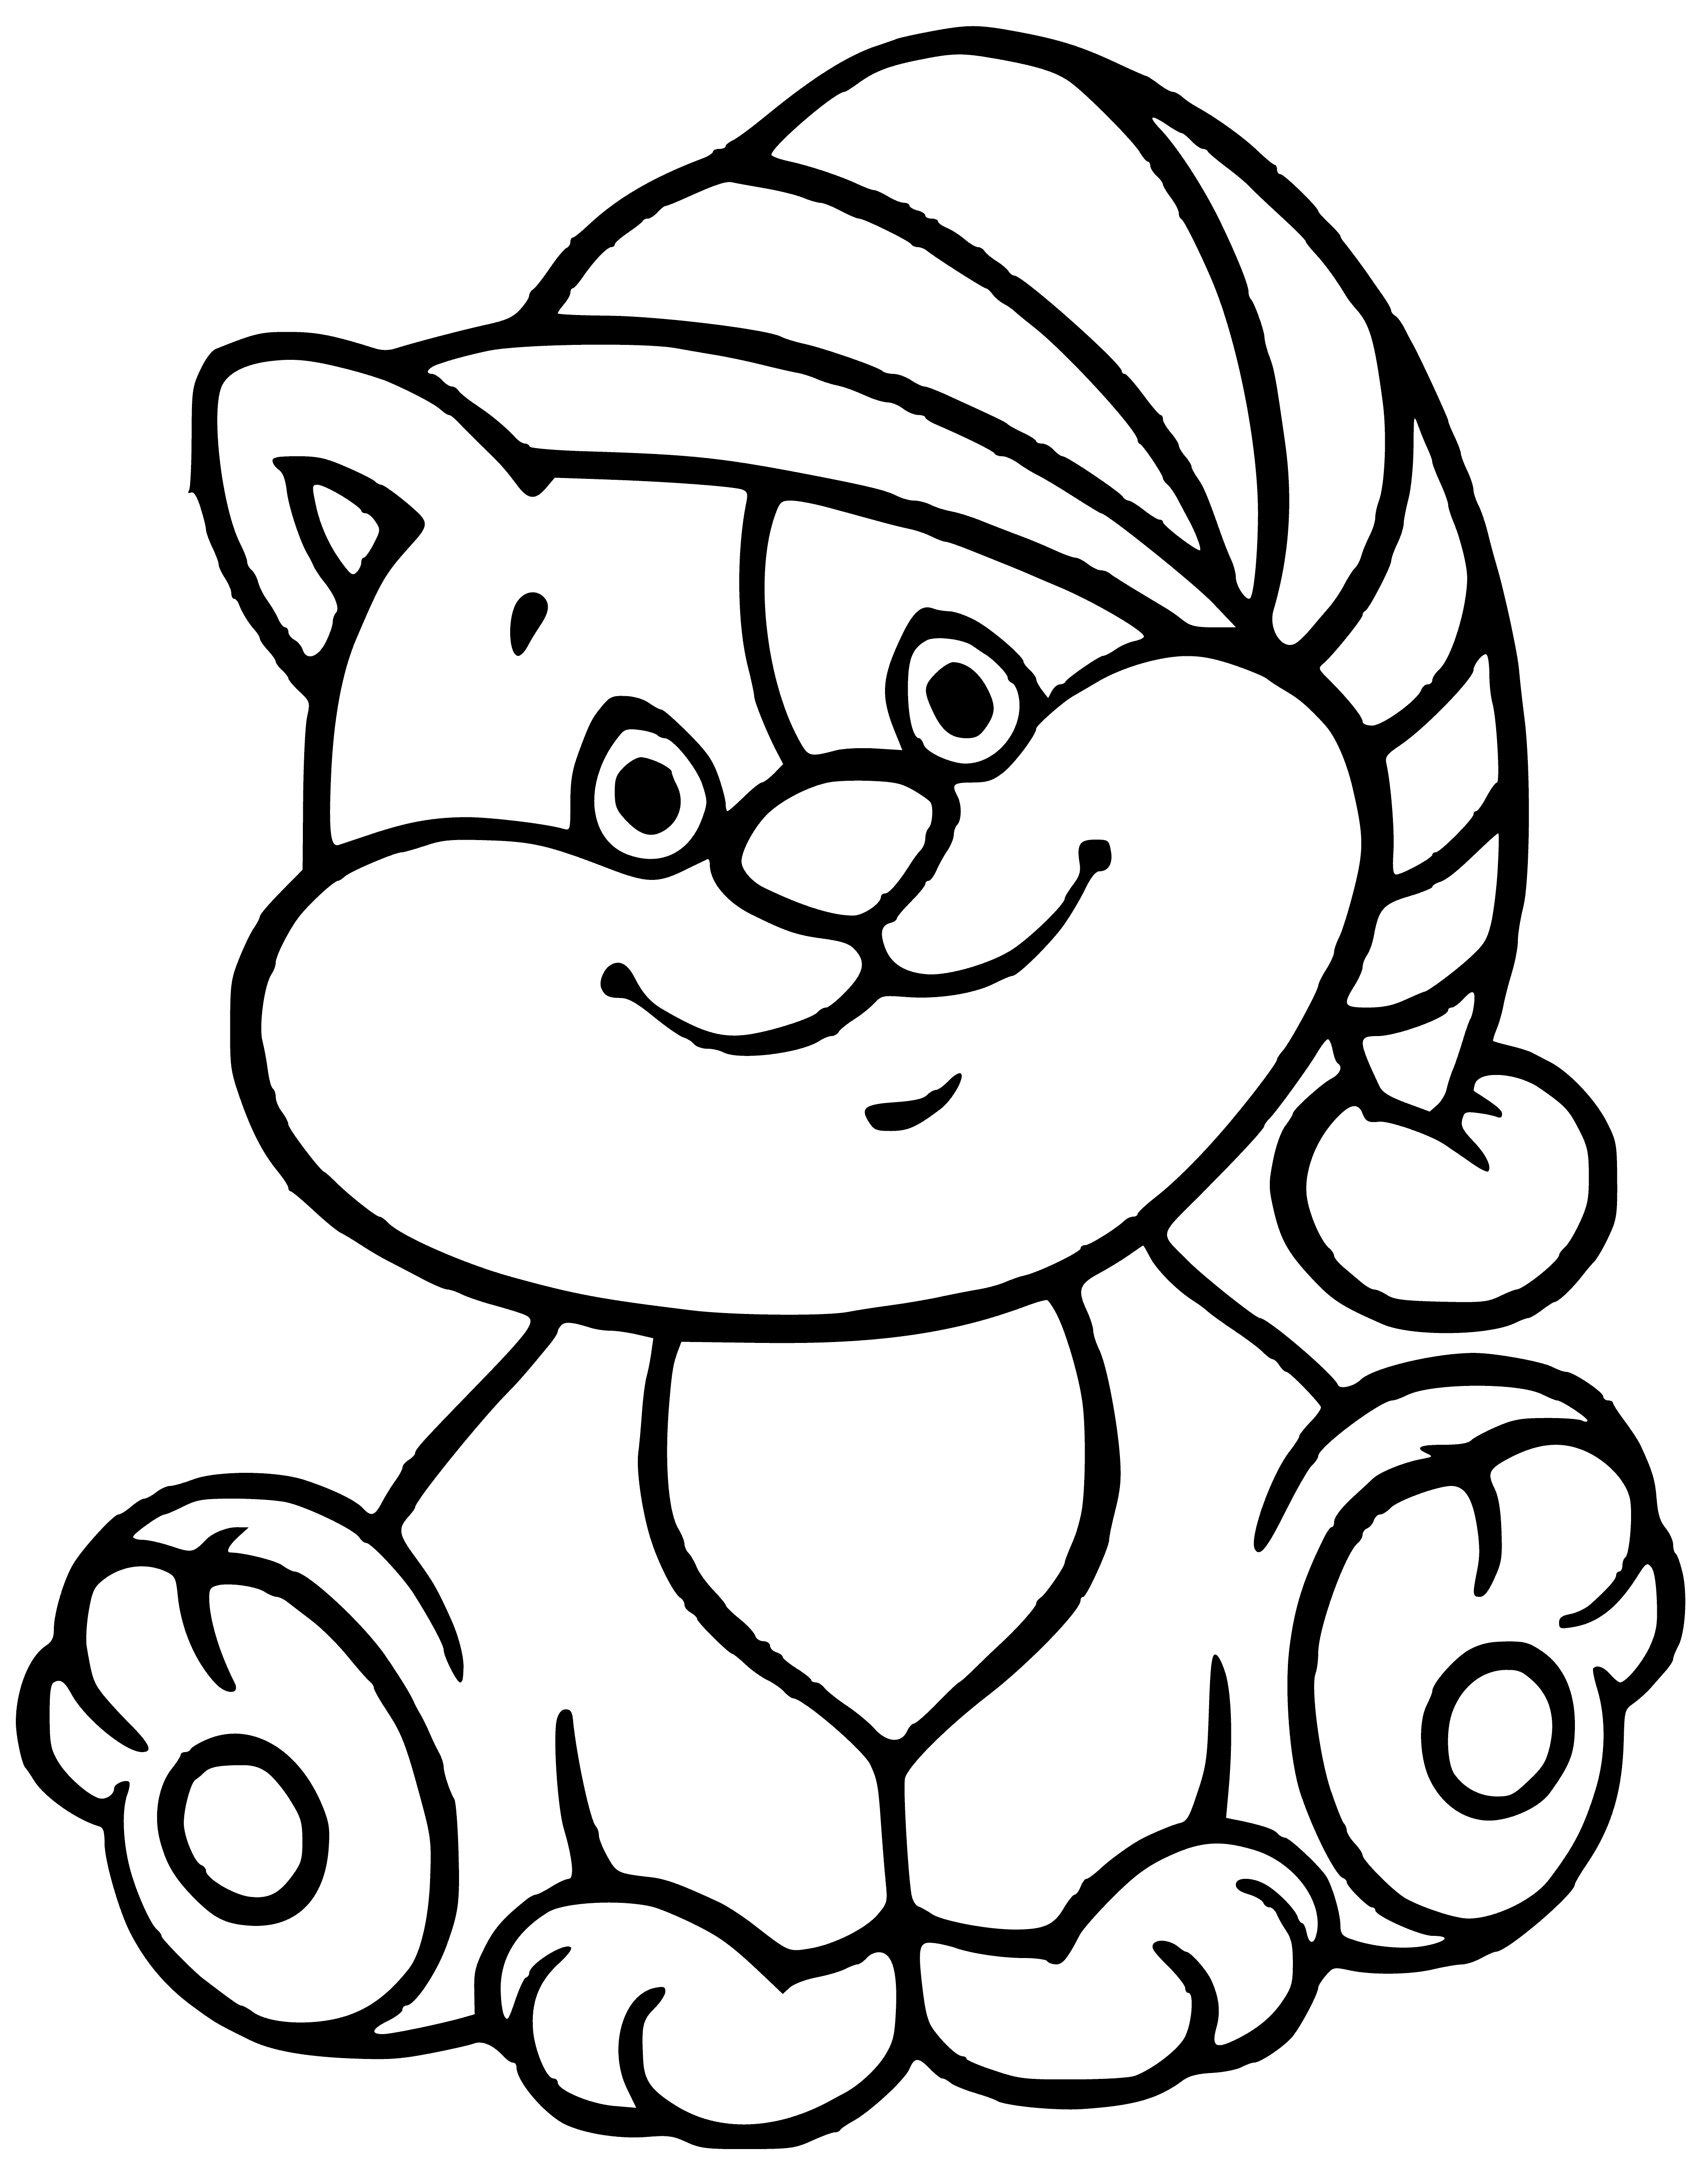 coloring page: Three kitties, different colors & expressions - brown happy, black sad, white scared - in boxes on coloring page.